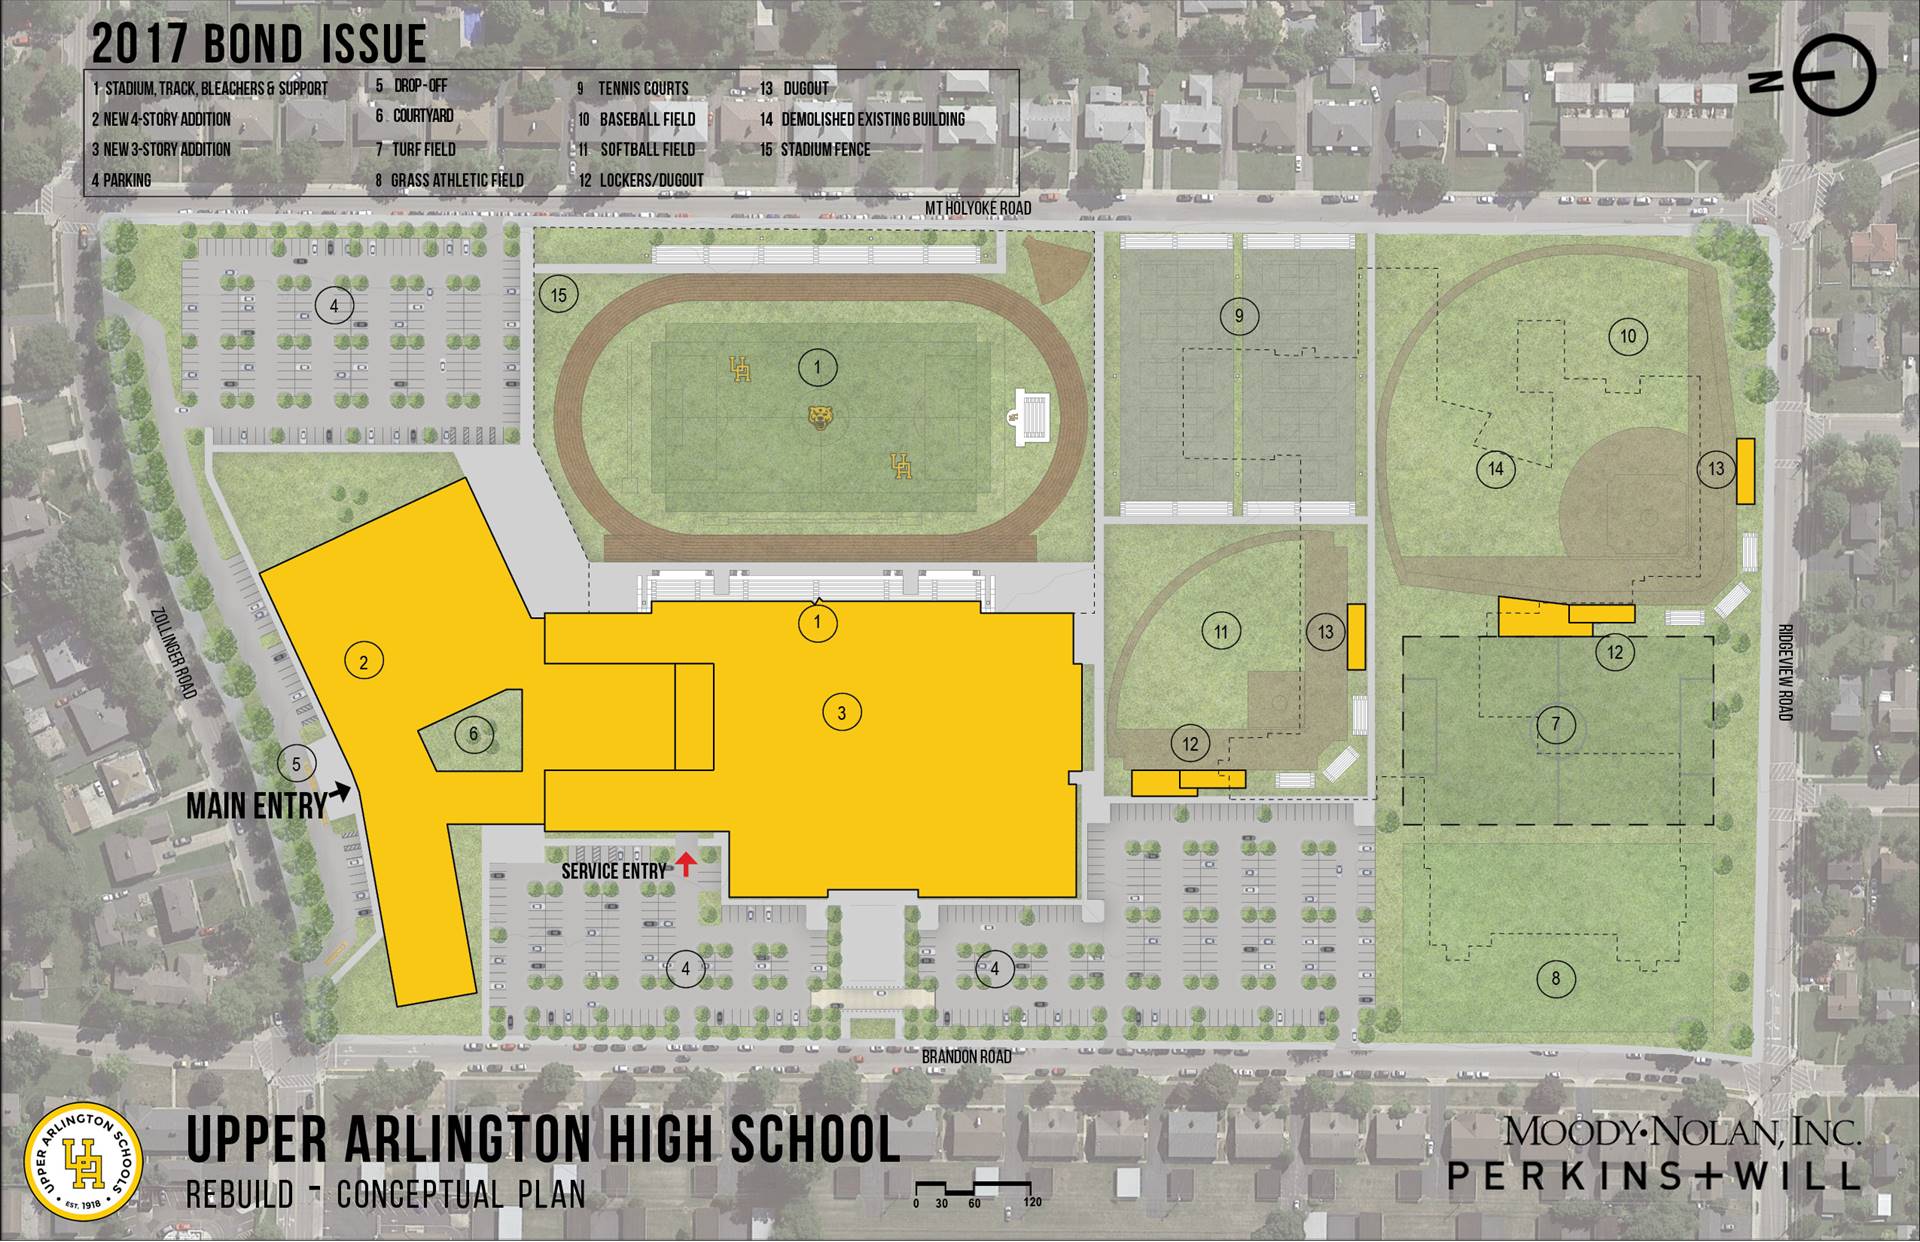 Conceptual new site plan for the high school